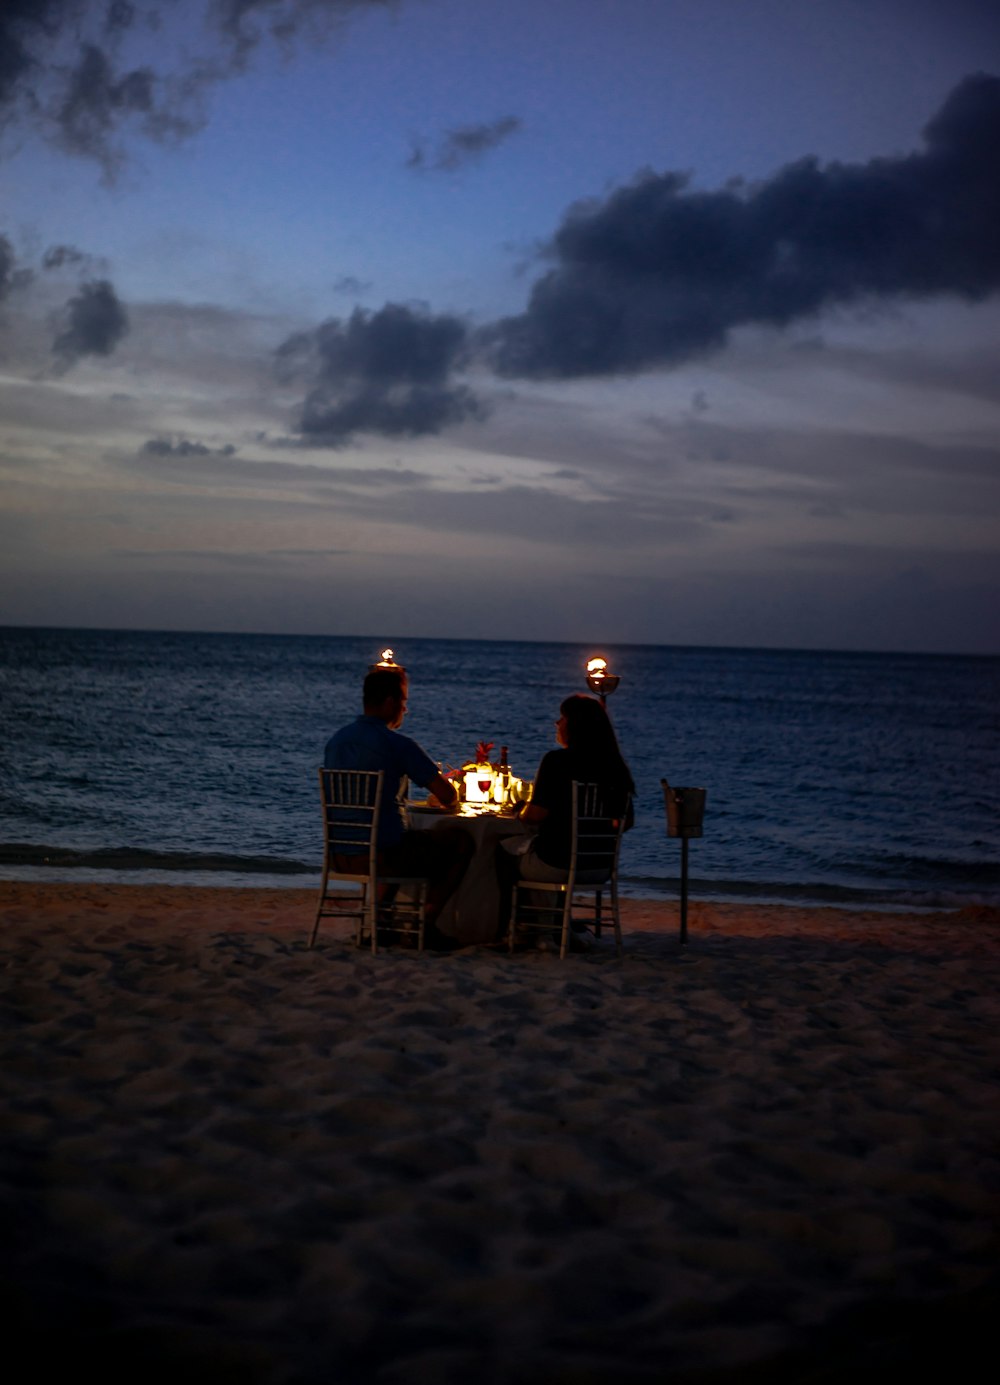 coupe on dinner date on seashore